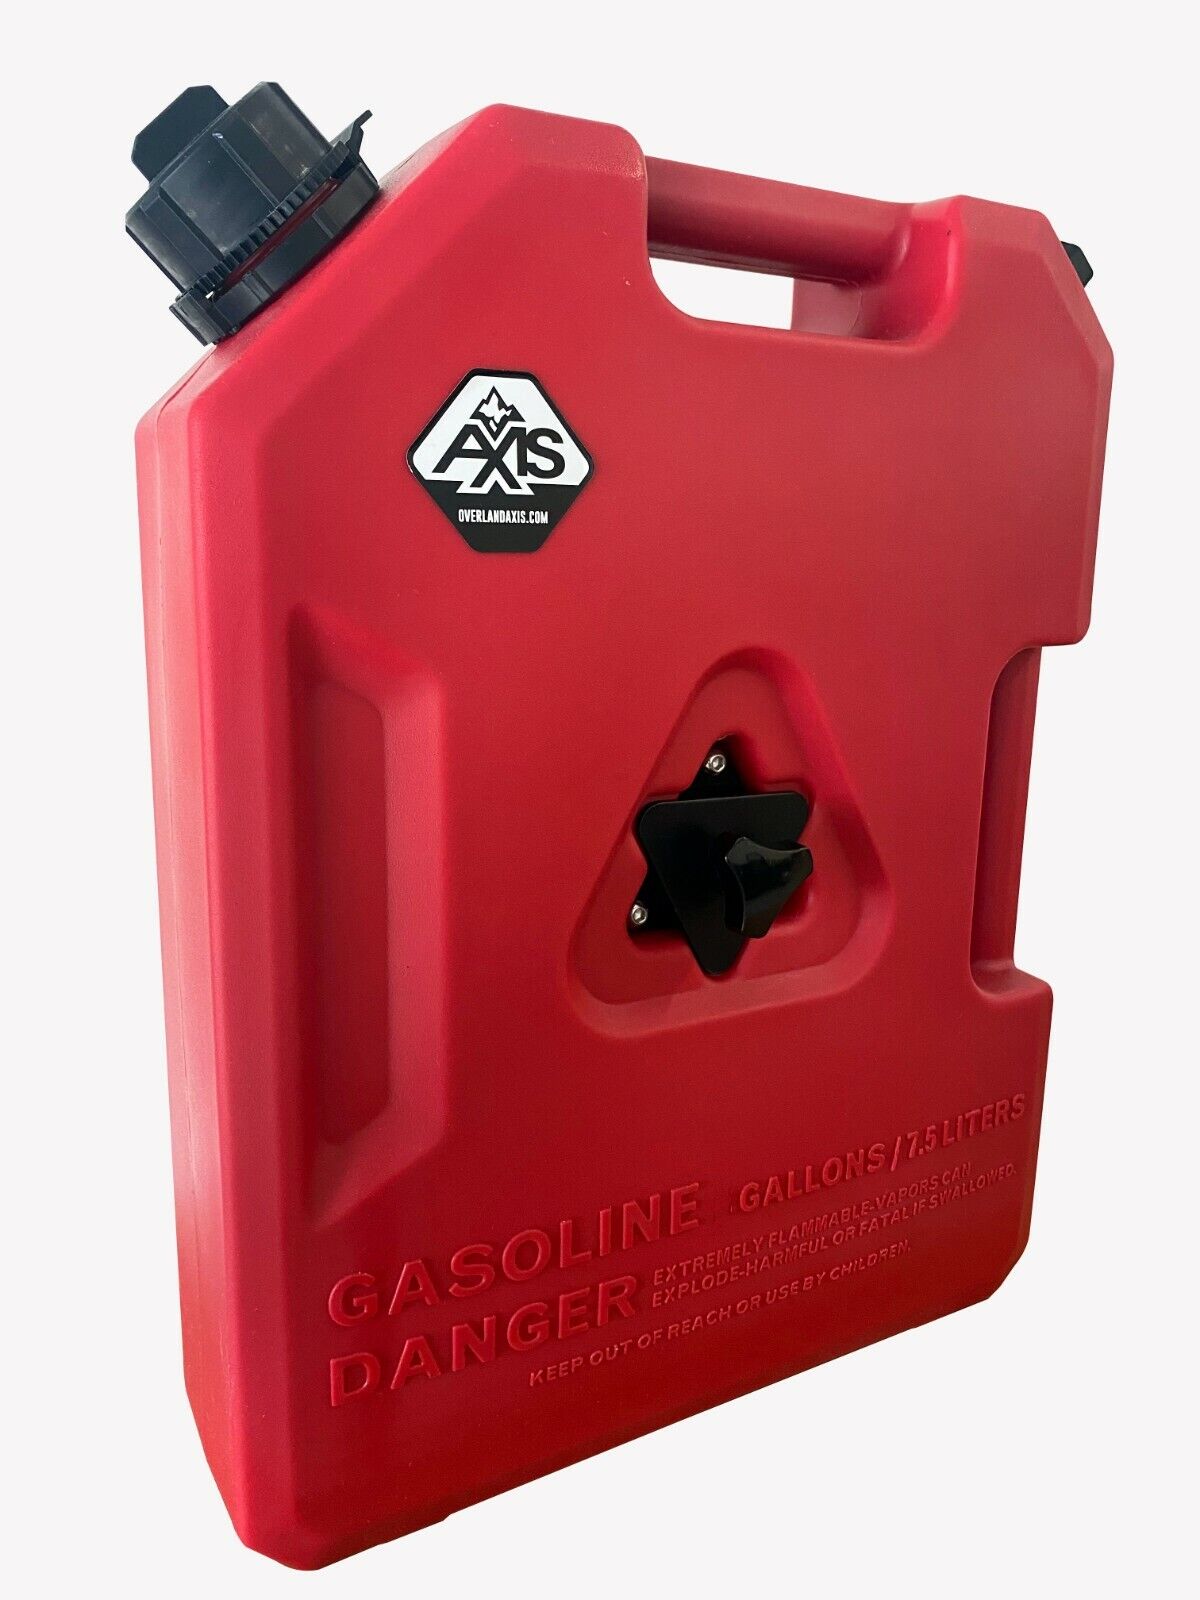 3 Gallon Jerry Gas Can with Mount Bracket for 4X4 OVERLAND OFF ROAD